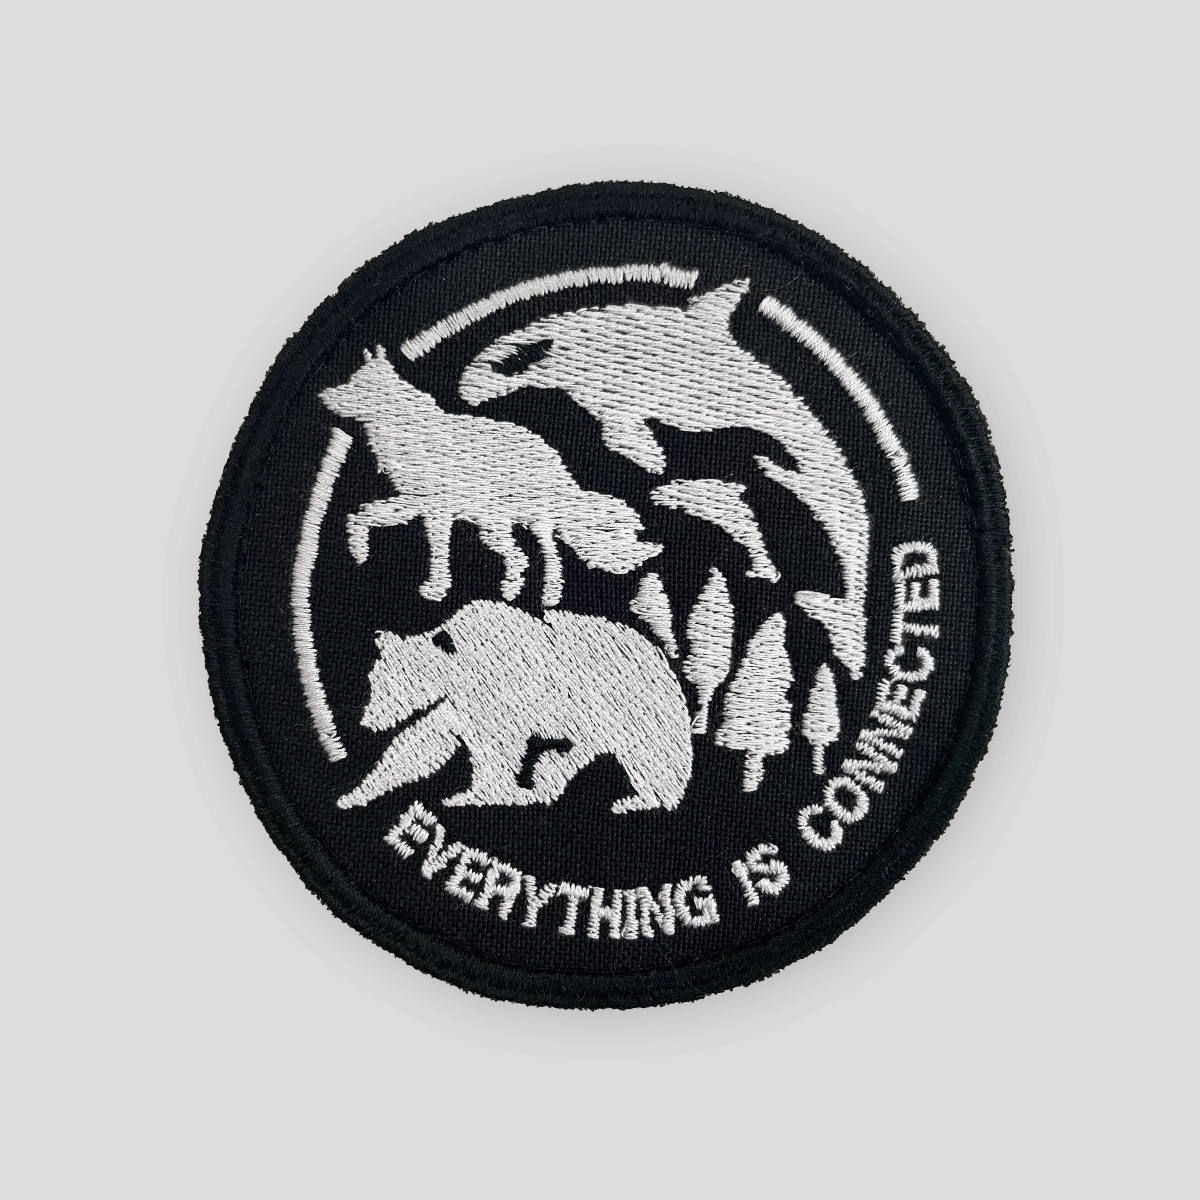 Patch "Everything is connected"